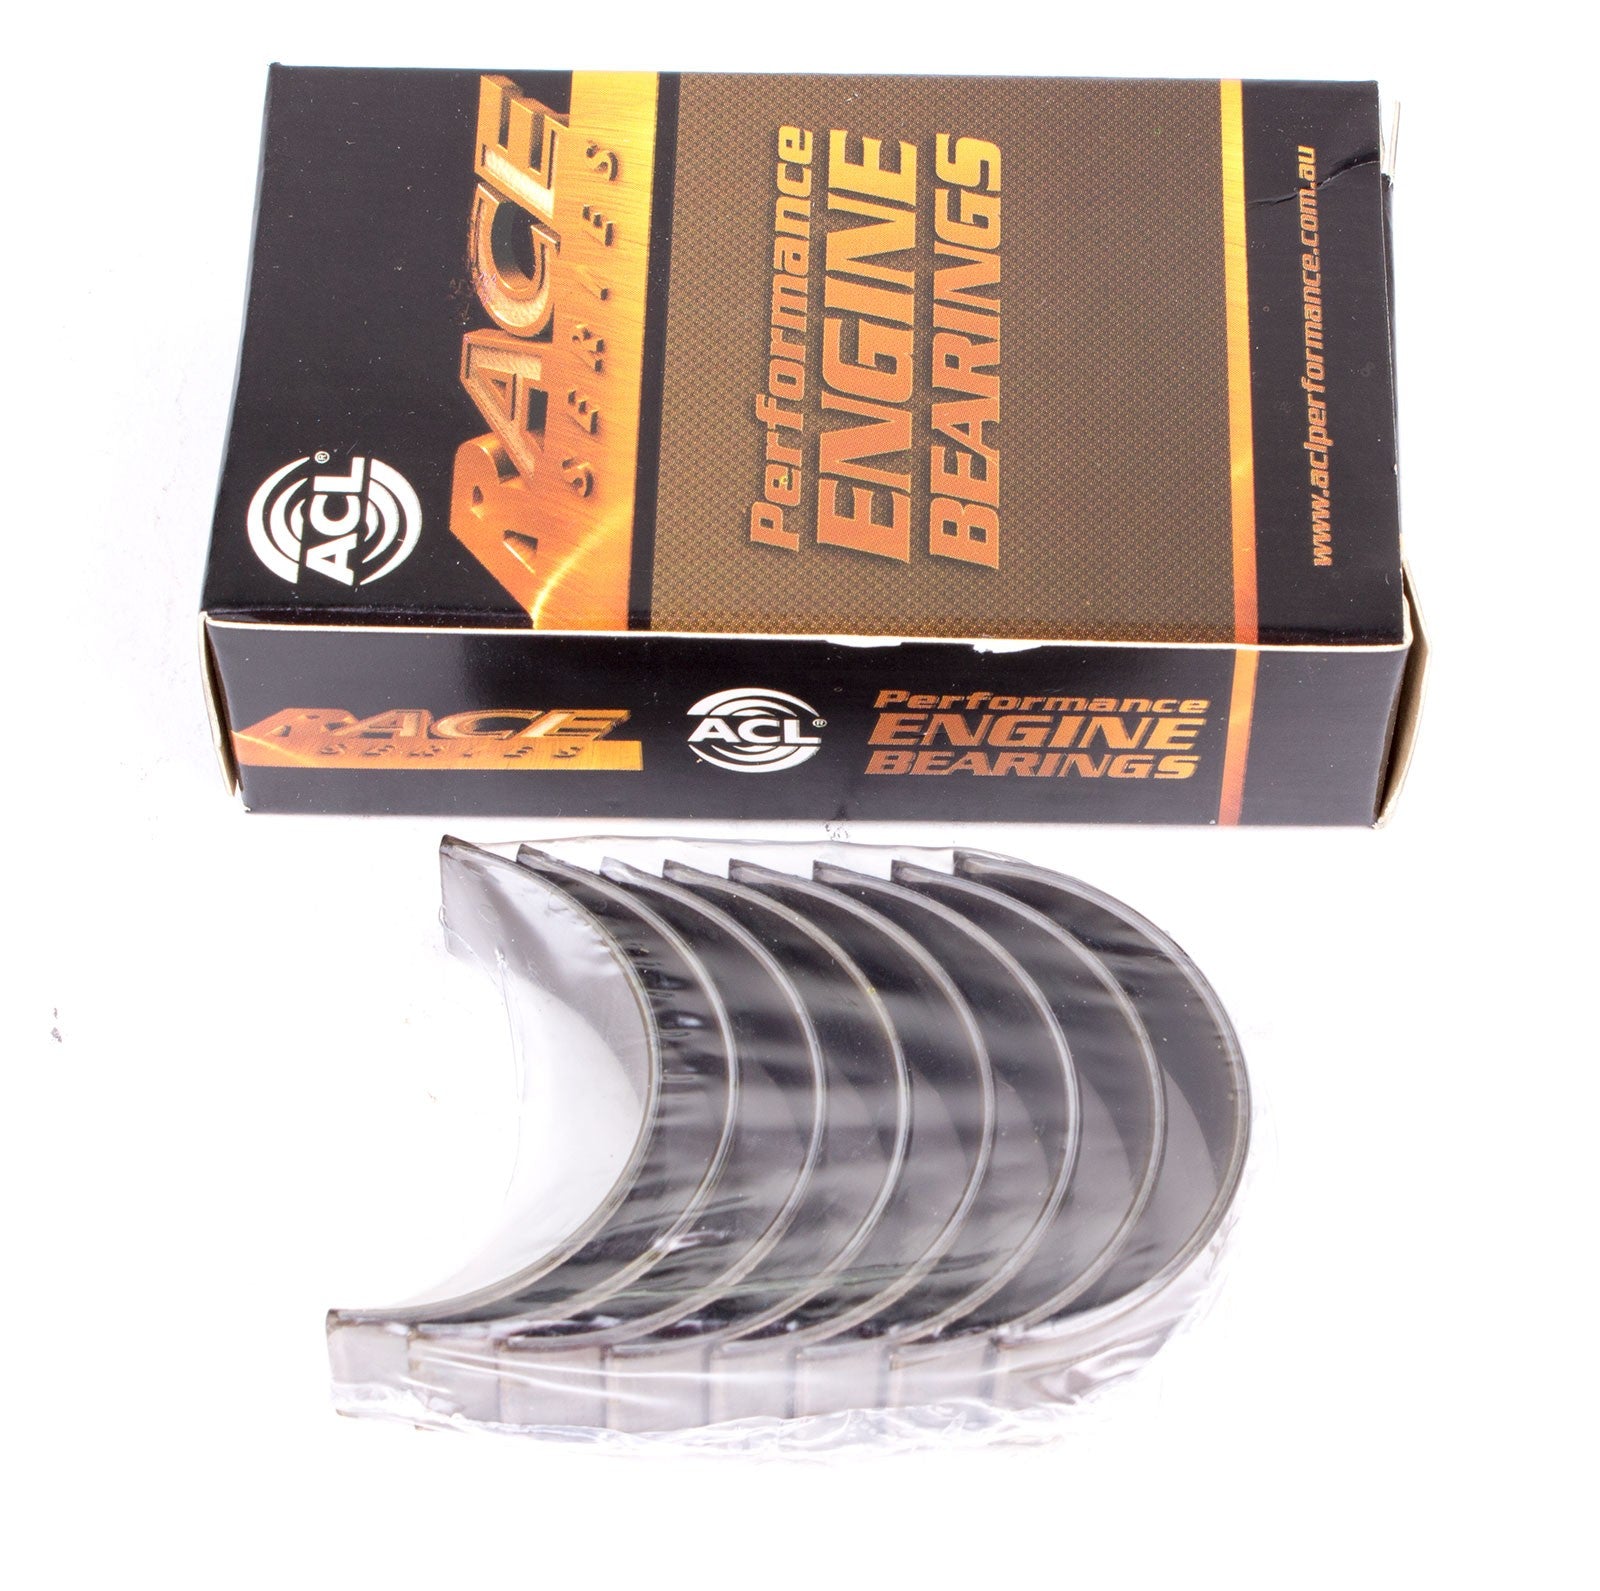 ACL 6M5563H-.025 Main bearing set (ACL Race Series) Photo-0 